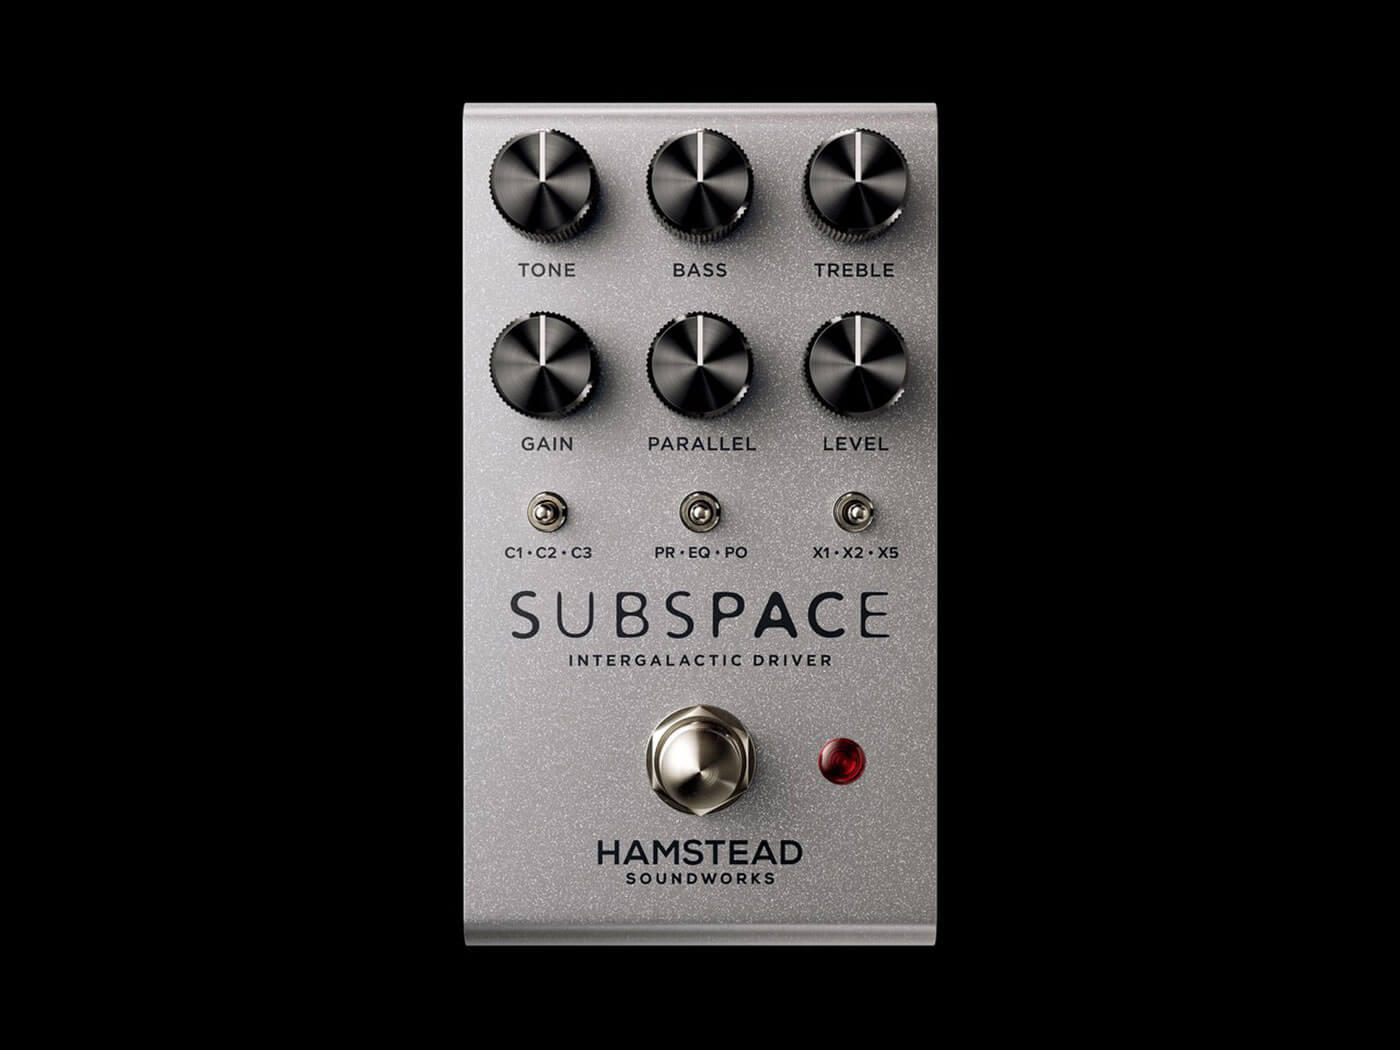 Hamstead Soundworks' Subspace